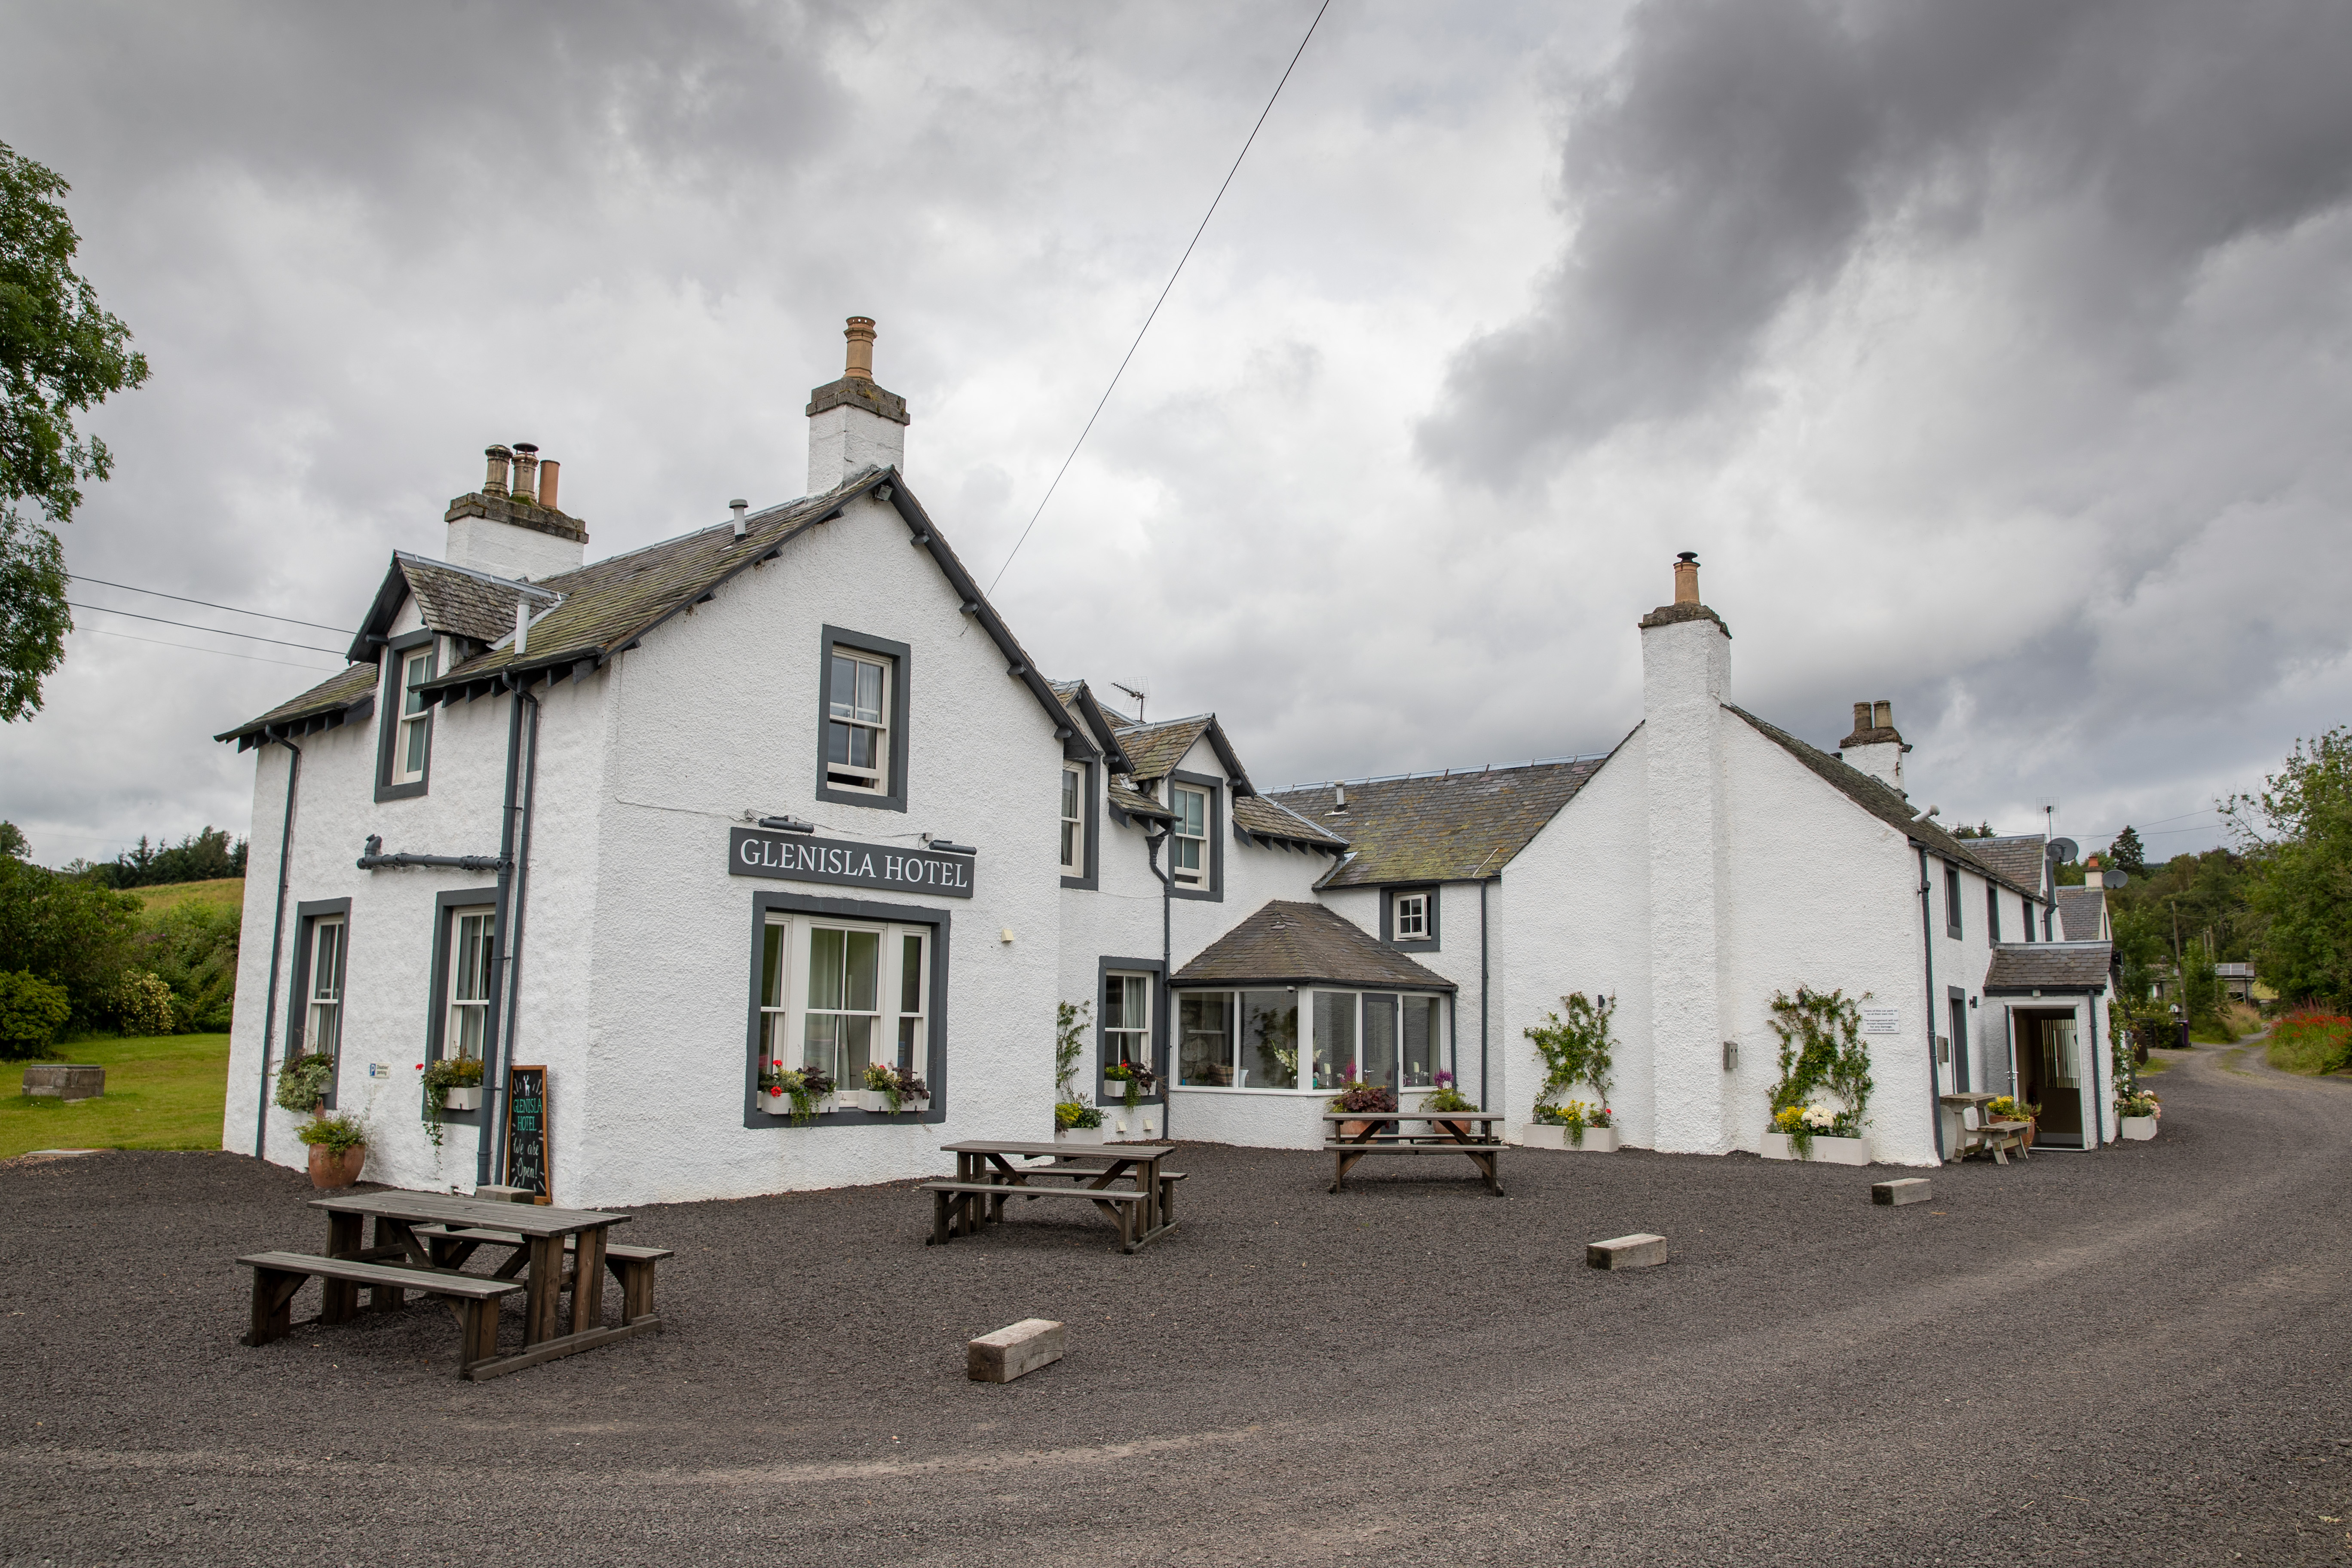 Glenisla Hotel has been closed since the start of the year.